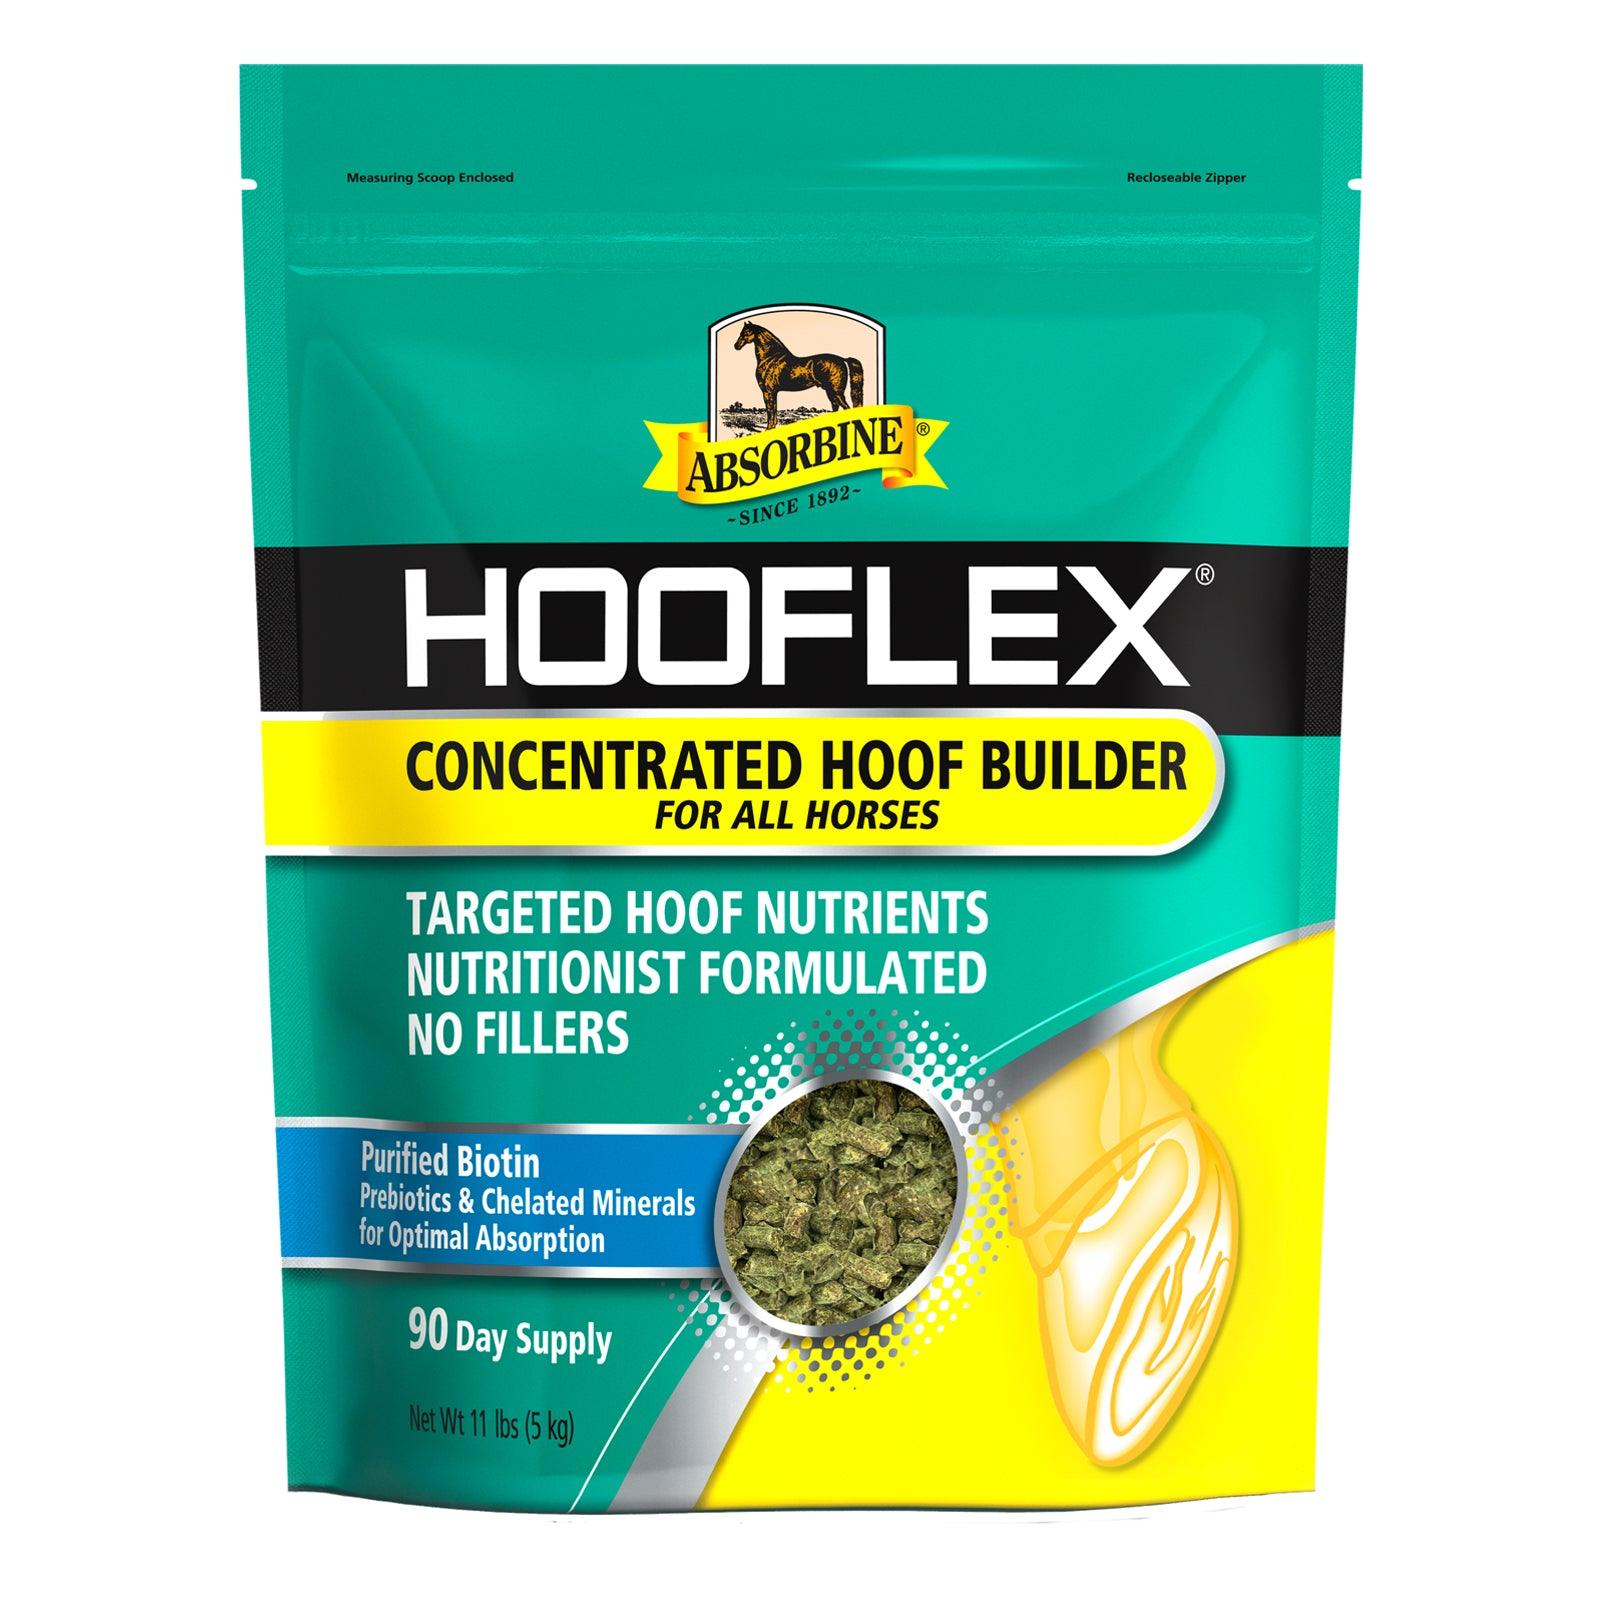 Absorbine Hooflex Concentrated Hoof Builder for all horses.  Targeted hoof nutrients, nutritionist formulated, no fillers 90 day supply bag.  Net weight 11 lbs.